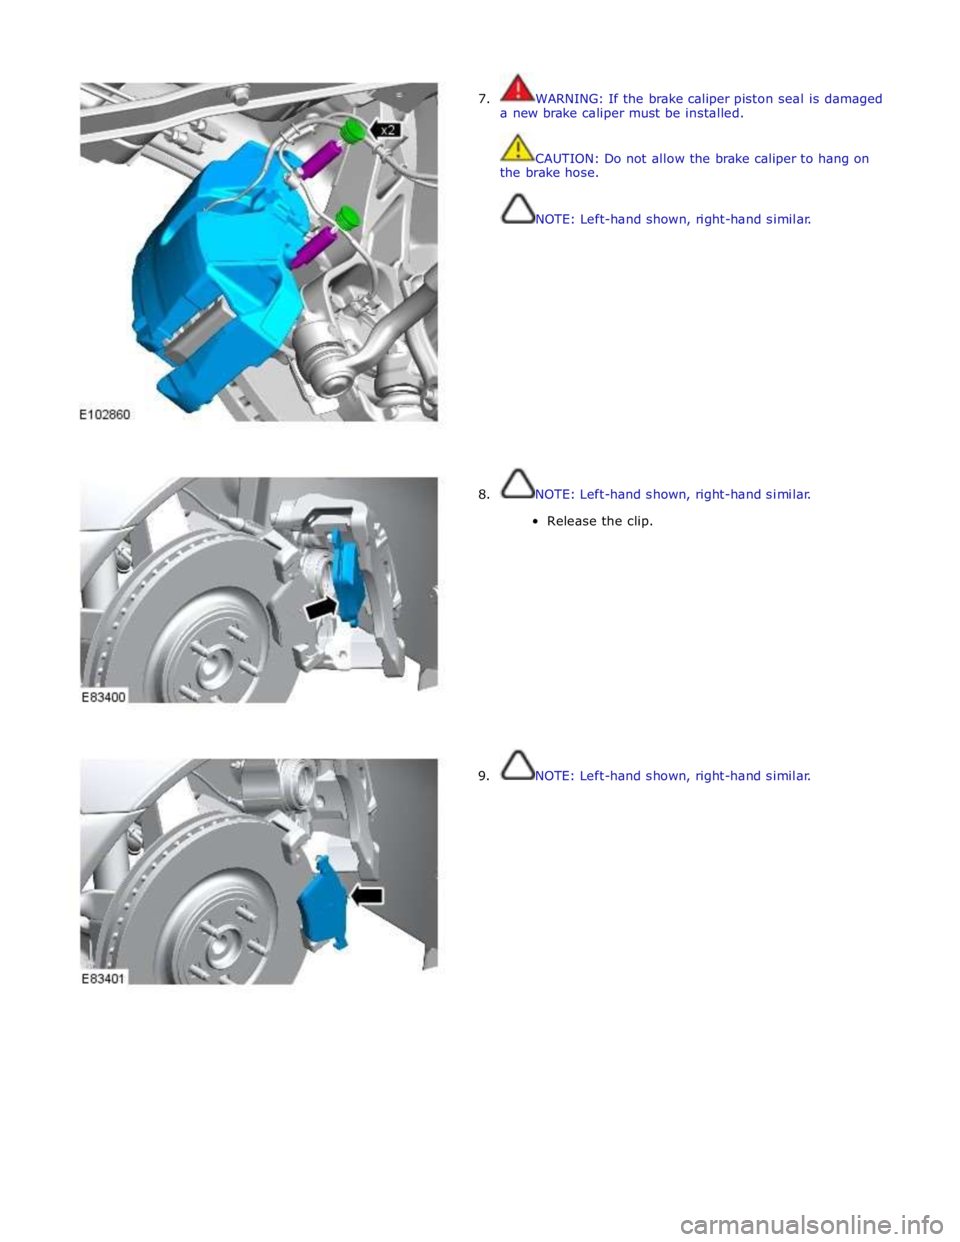 JAGUAR XFR 2010 1.G Workshop Manual  
7.  WARNING: If the brake caliper piston seal is damaged 
a new brake caliper must be installed. 
 
 
CAUTION: Do not allow the brake caliper to hang on 
the brake hose. 
 
 
NOTE: Left-hand shown, 